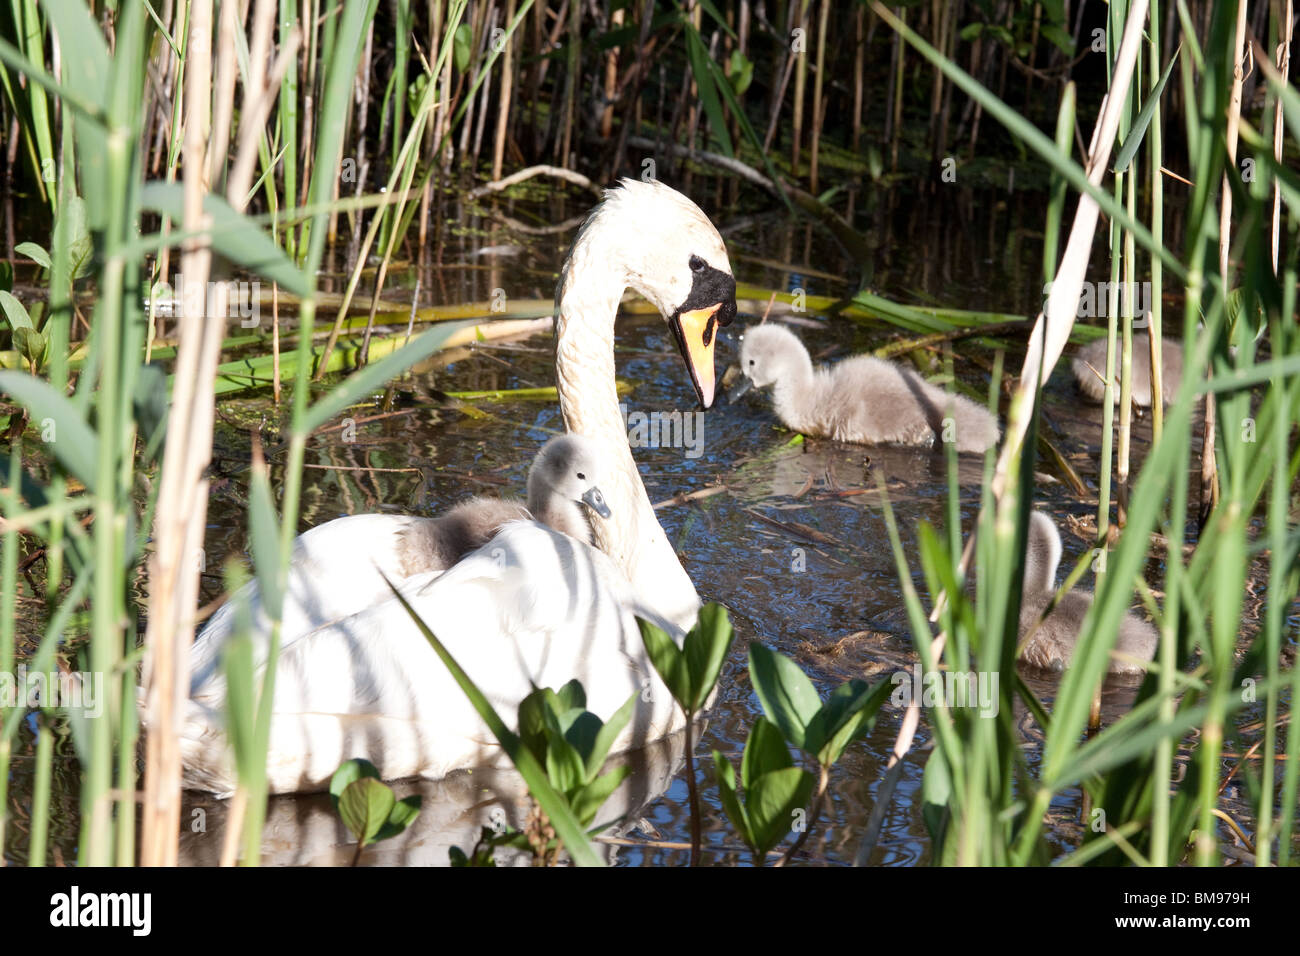 Swan swimming amongst reeds with her 4 cygnets, one riding on her back. Stock Photo